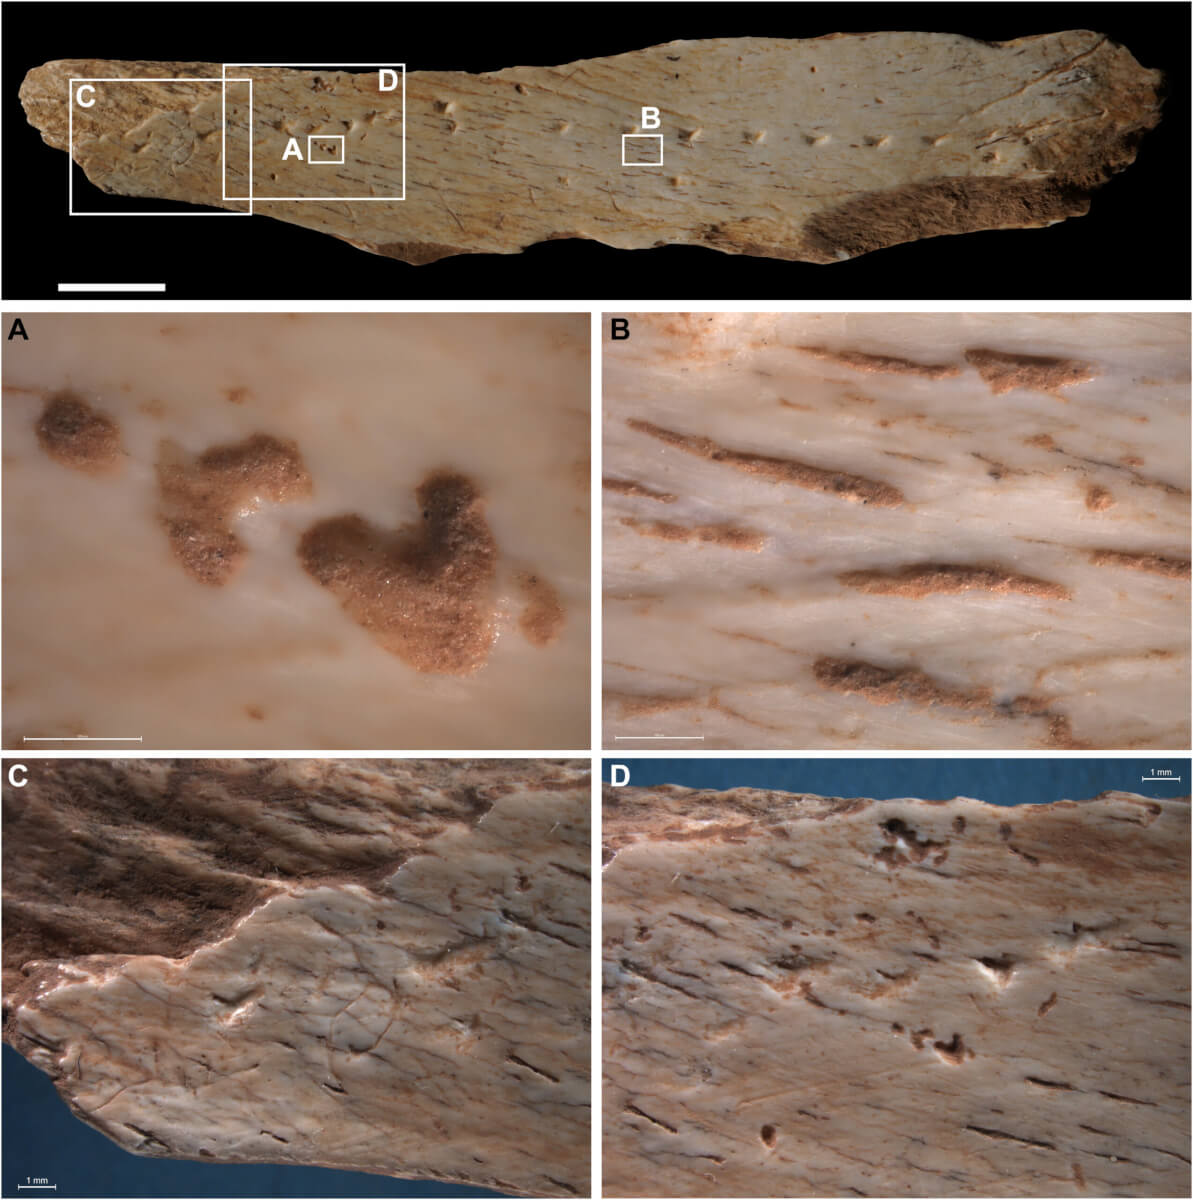 Fig. 3. Natural and anthropogenic alteration of the Canyars bone.(A) The Canyars bone presents a good state of preservation, apart from a few traces of root etching. (B) Vascular openings are filled with reddish-brown sediment, and their outlines are smoothed and rounded. (C and D) Some scraping marks are visible on the surface. Scale bar (top), 1 cm.